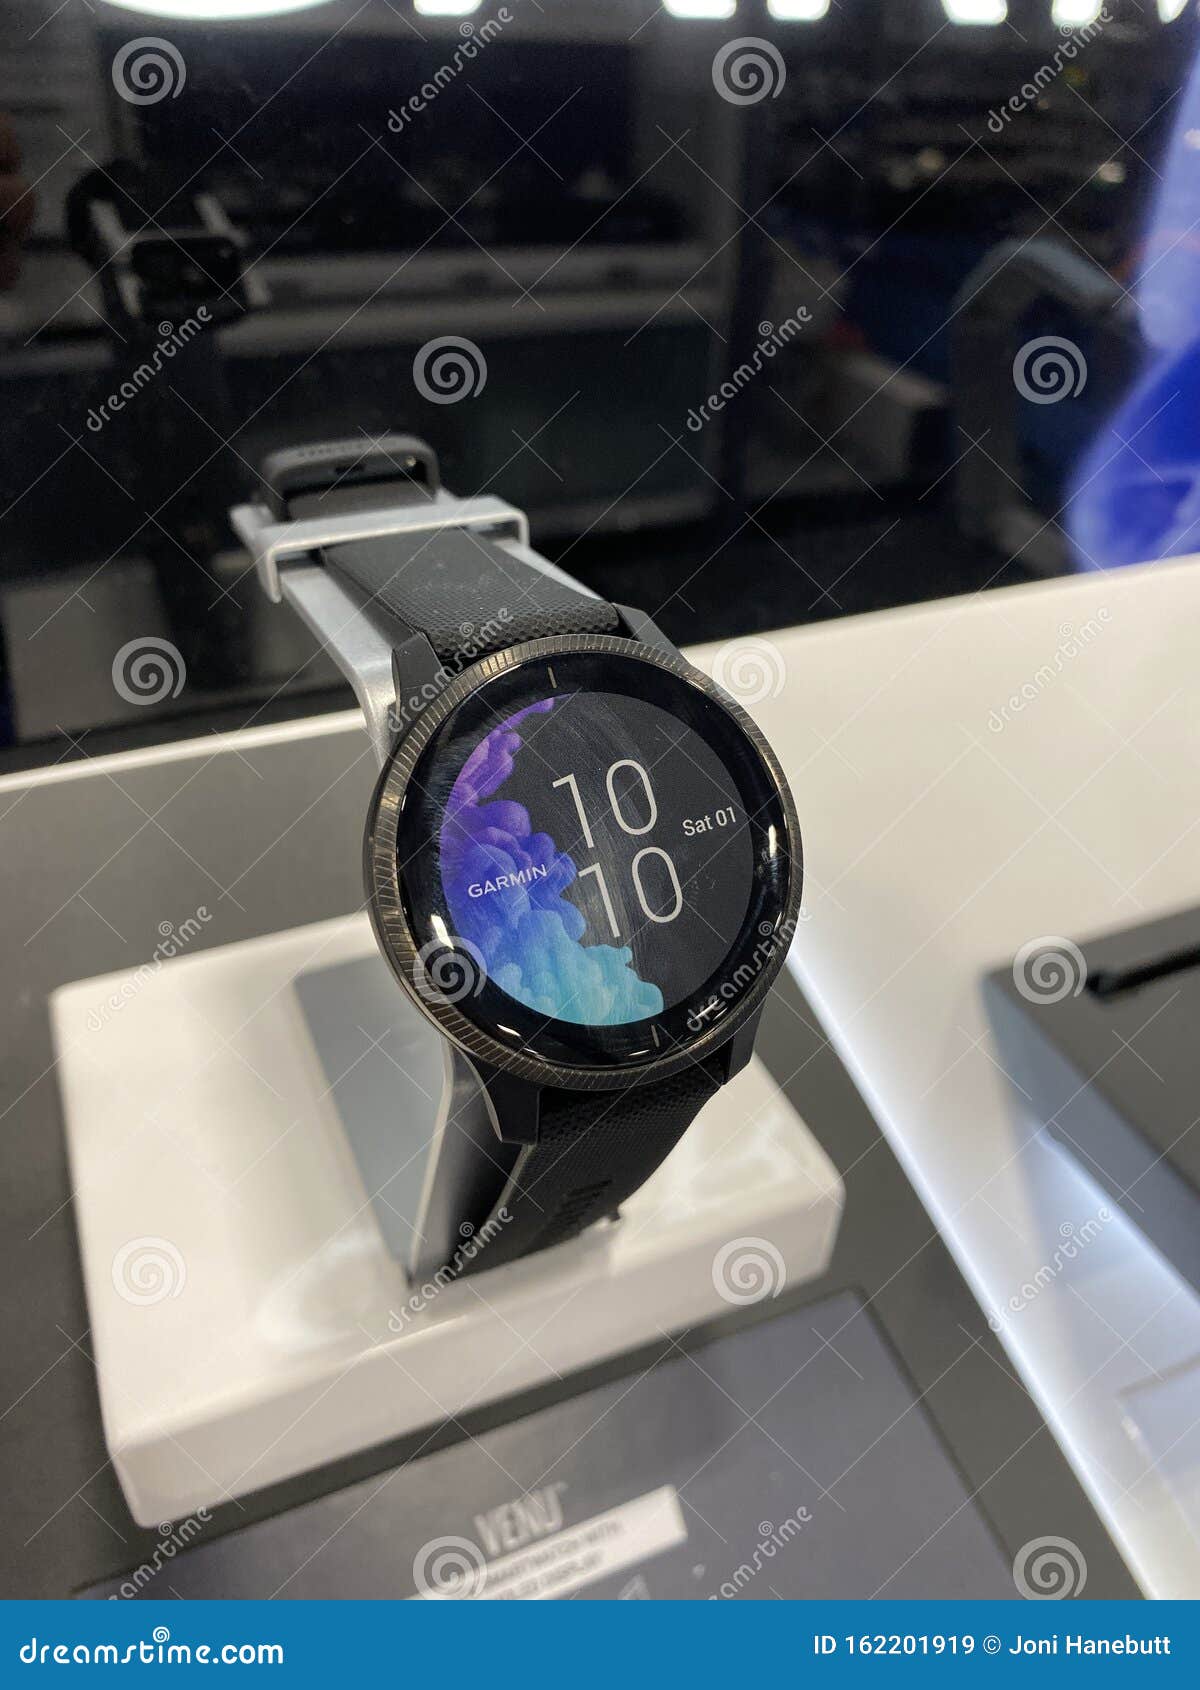 Garmin Forerunner Fitness Tracker Smart Watch on Display at a Retail Store Editorial Image of flusa, forerunner: 162201919